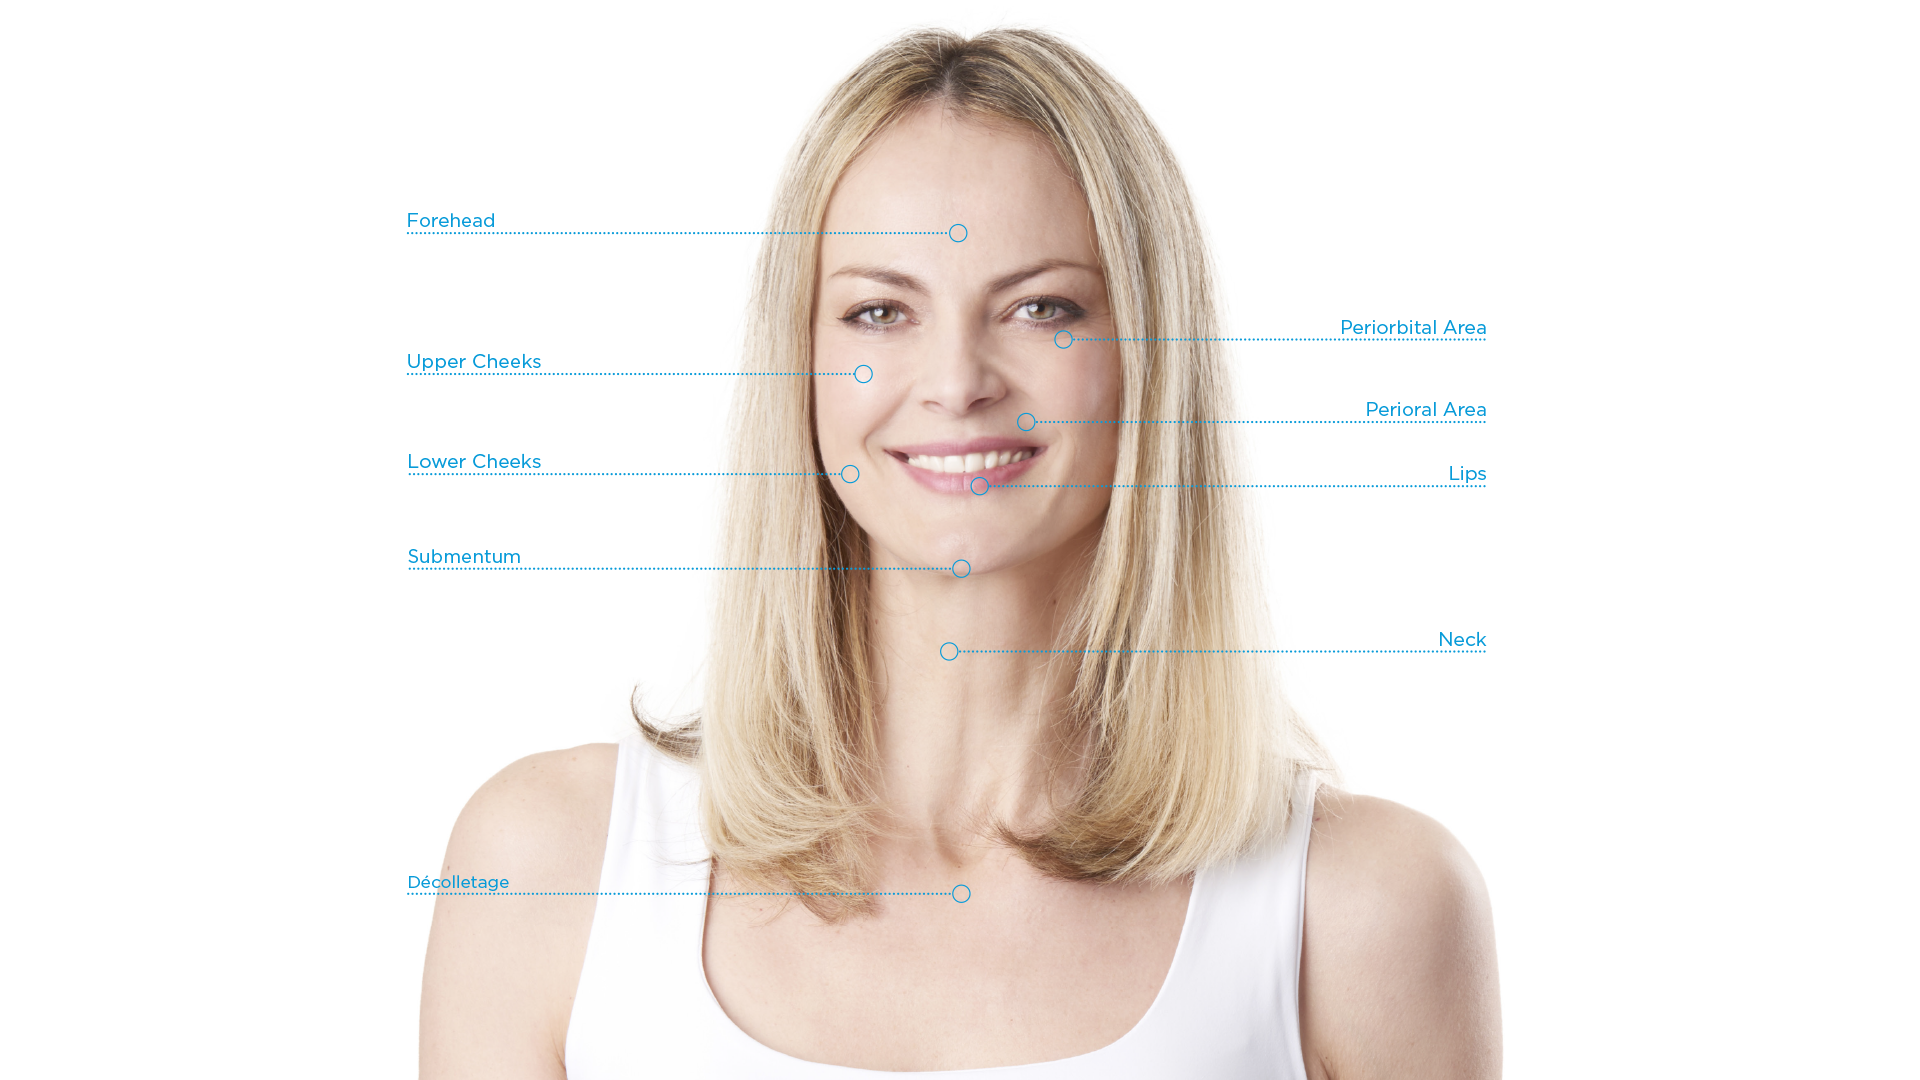 NEW EXION Radio Frequency Wrinkle & Skin Tightening save up to €1,001